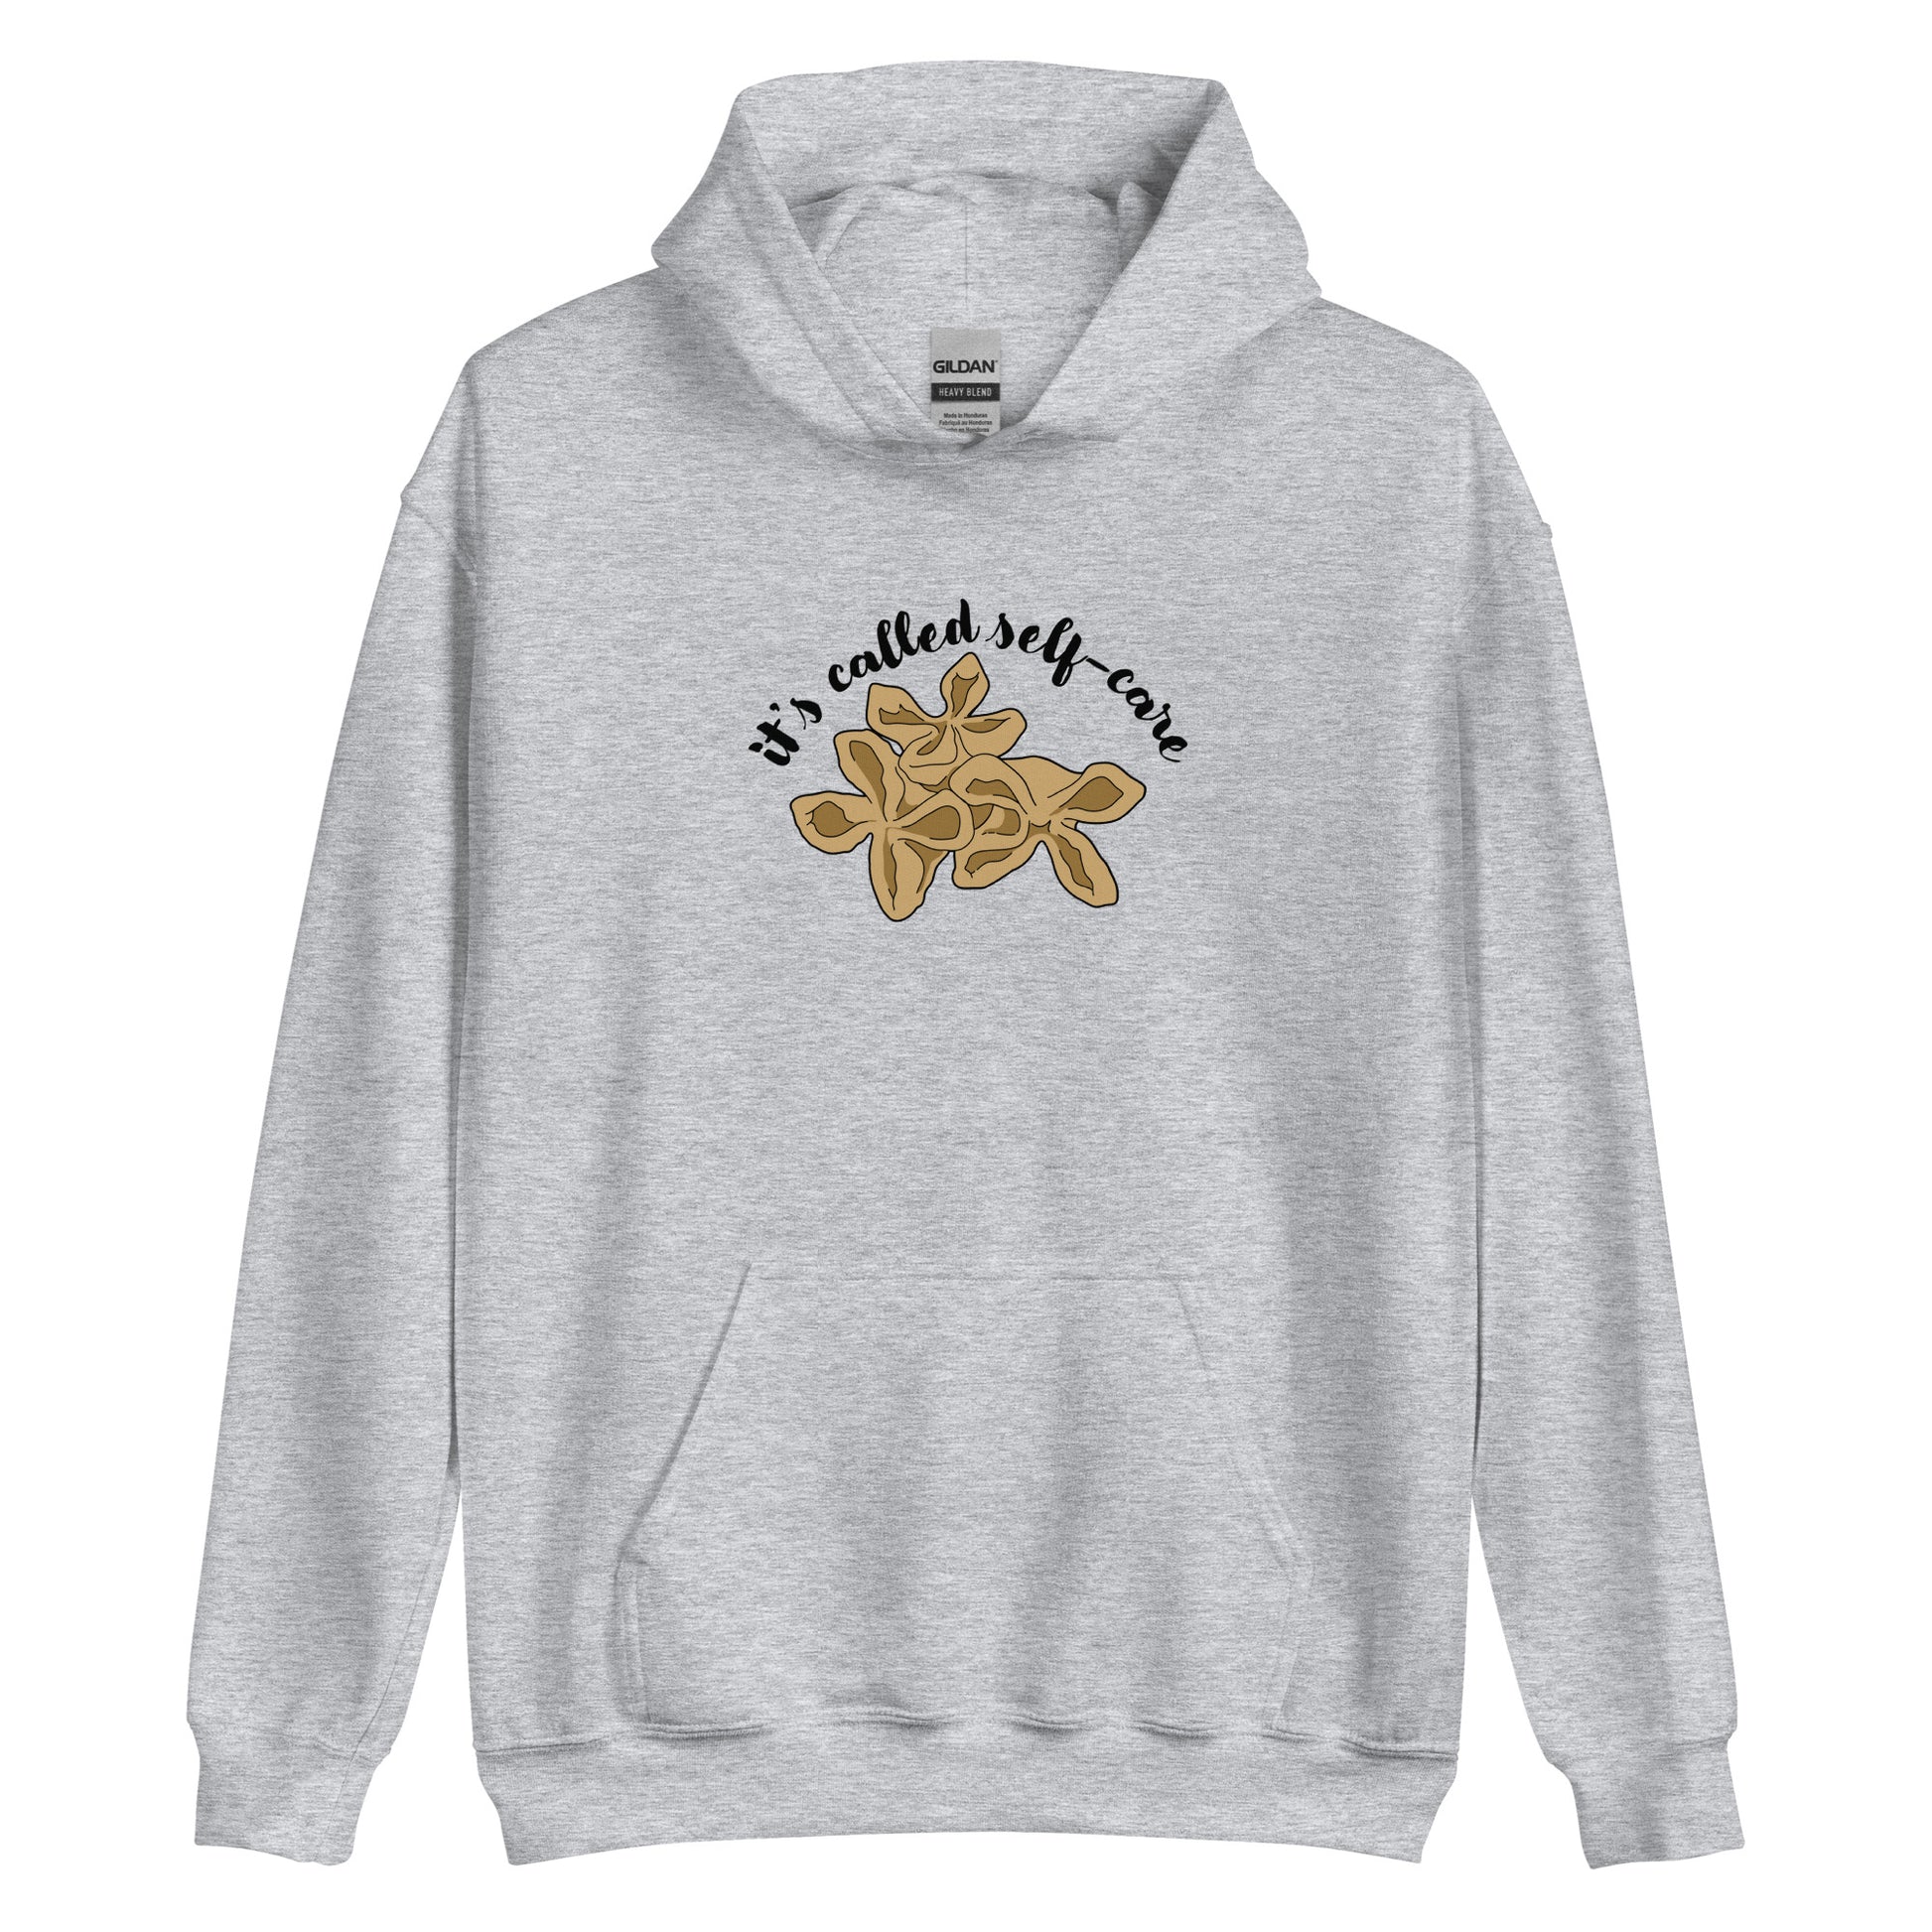 A grey hooded sweatshirt featuring an illustration of three pieces of crab rangoon. Text in an arc above the crab rangoon reads "it's called self-care" in a cursive script.